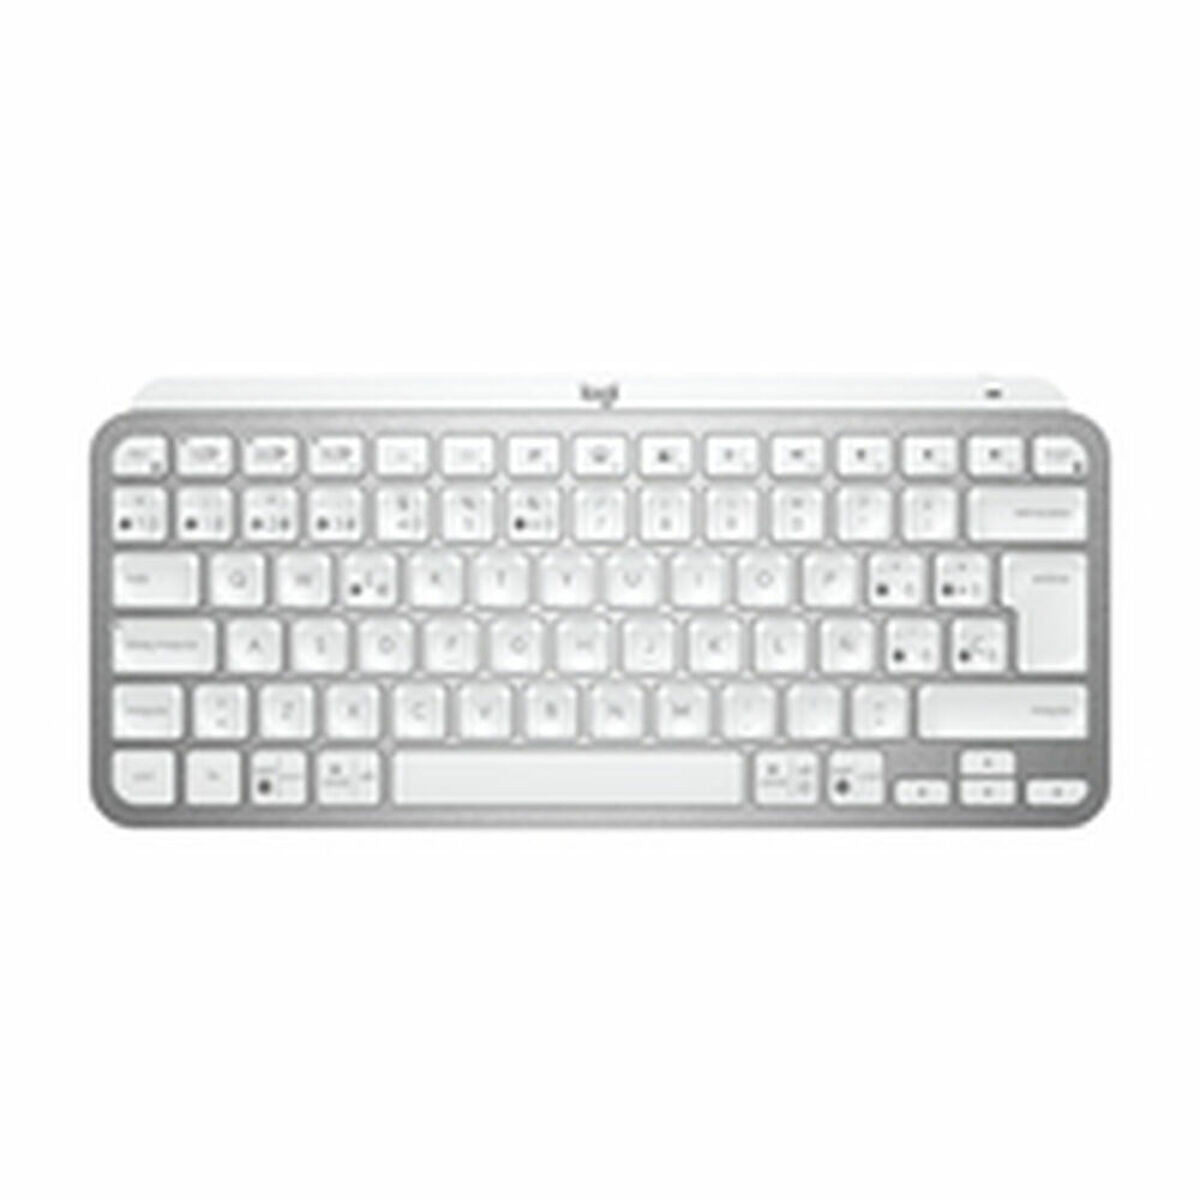 Keyboard Logitech 920-010491 Spanish Grey Silver Spanish Qwerty QWERTY, Logitech, Computing, Accessories, keyboard-logitech-920-010491-spanish-grey-silver-spanish-qwerty-qwerty, Brand_Logitech, category-reference-2609, category-reference-2642, category-reference-2646, category-reference-t-19685, category-reference-t-19908, category-reference-t-21353, computers / peripherals, Condition_NEW, office, Price_100 - 200, Teleworking, RiotNook